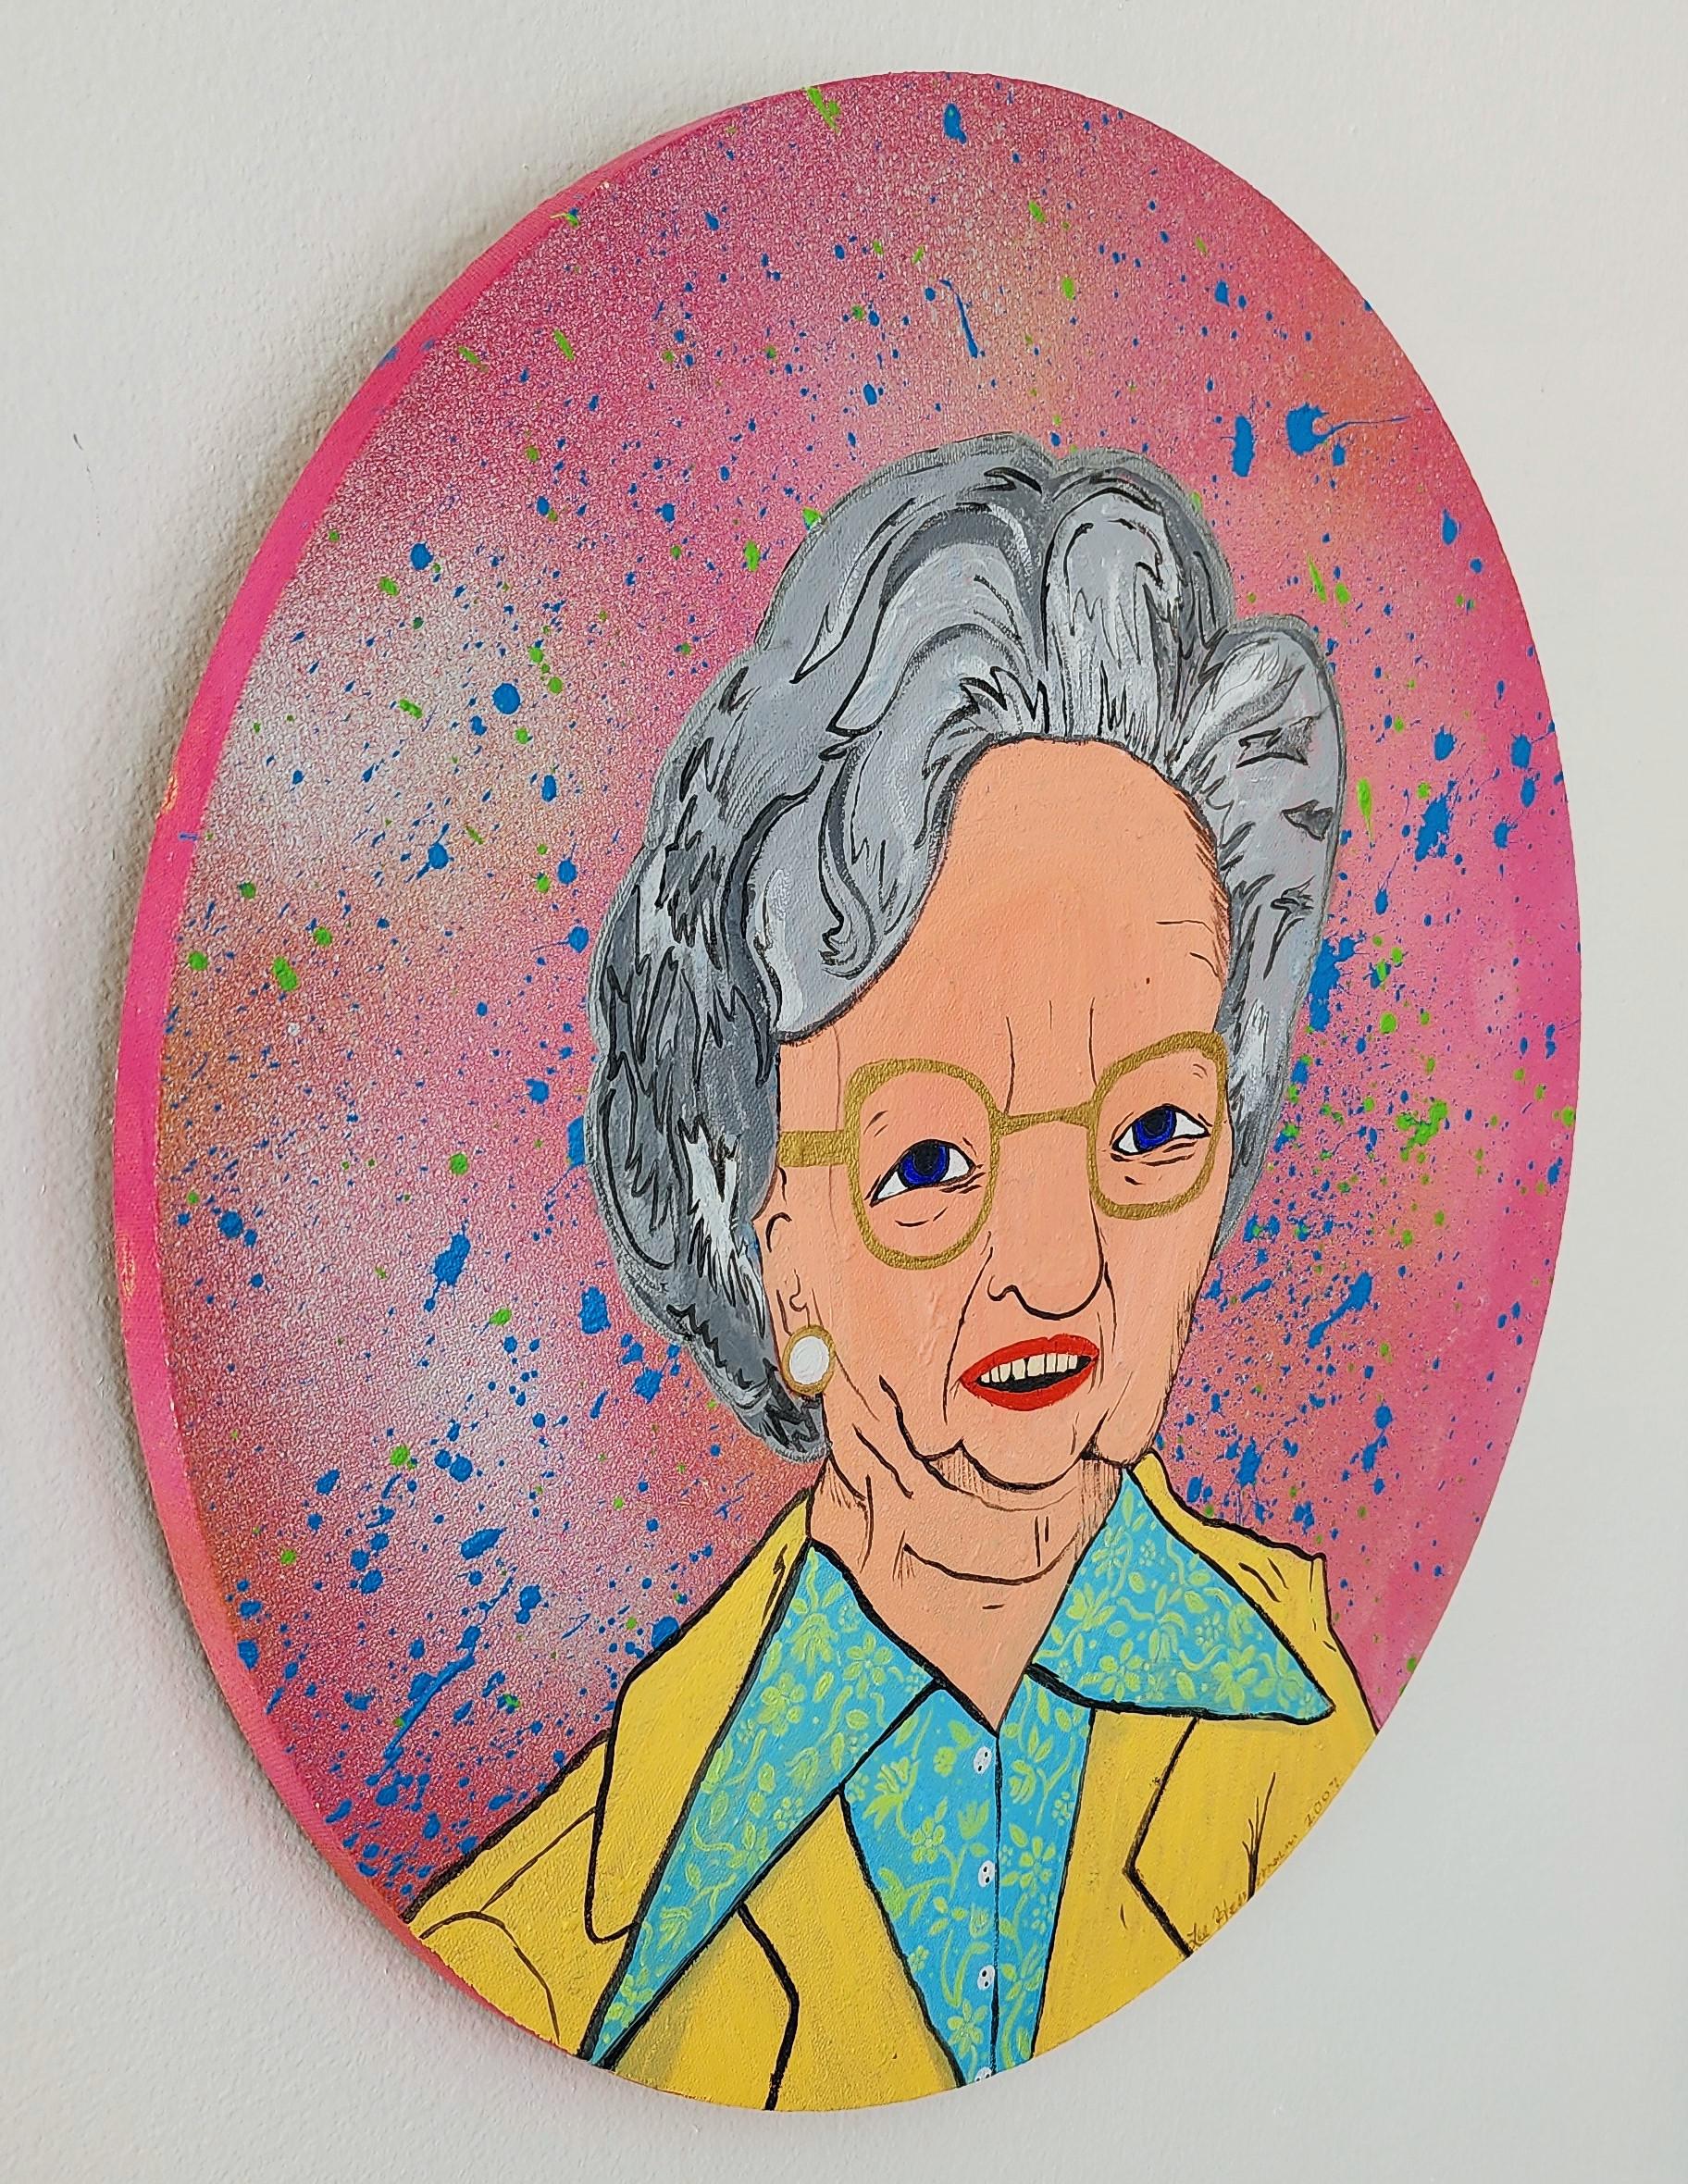 Lee Heinemann
Grandmother
Acrylic on Canvas
Year: 2007
Size: 16in diameter, 0.5in deep
Signed and dated by hand on verso
COA provided
Ref.: 924802-1704

Tags: Portrait, Vibrant, Drips, Neon, Splatter, Comical, Grandmother, Grandma, Sixties

Lee